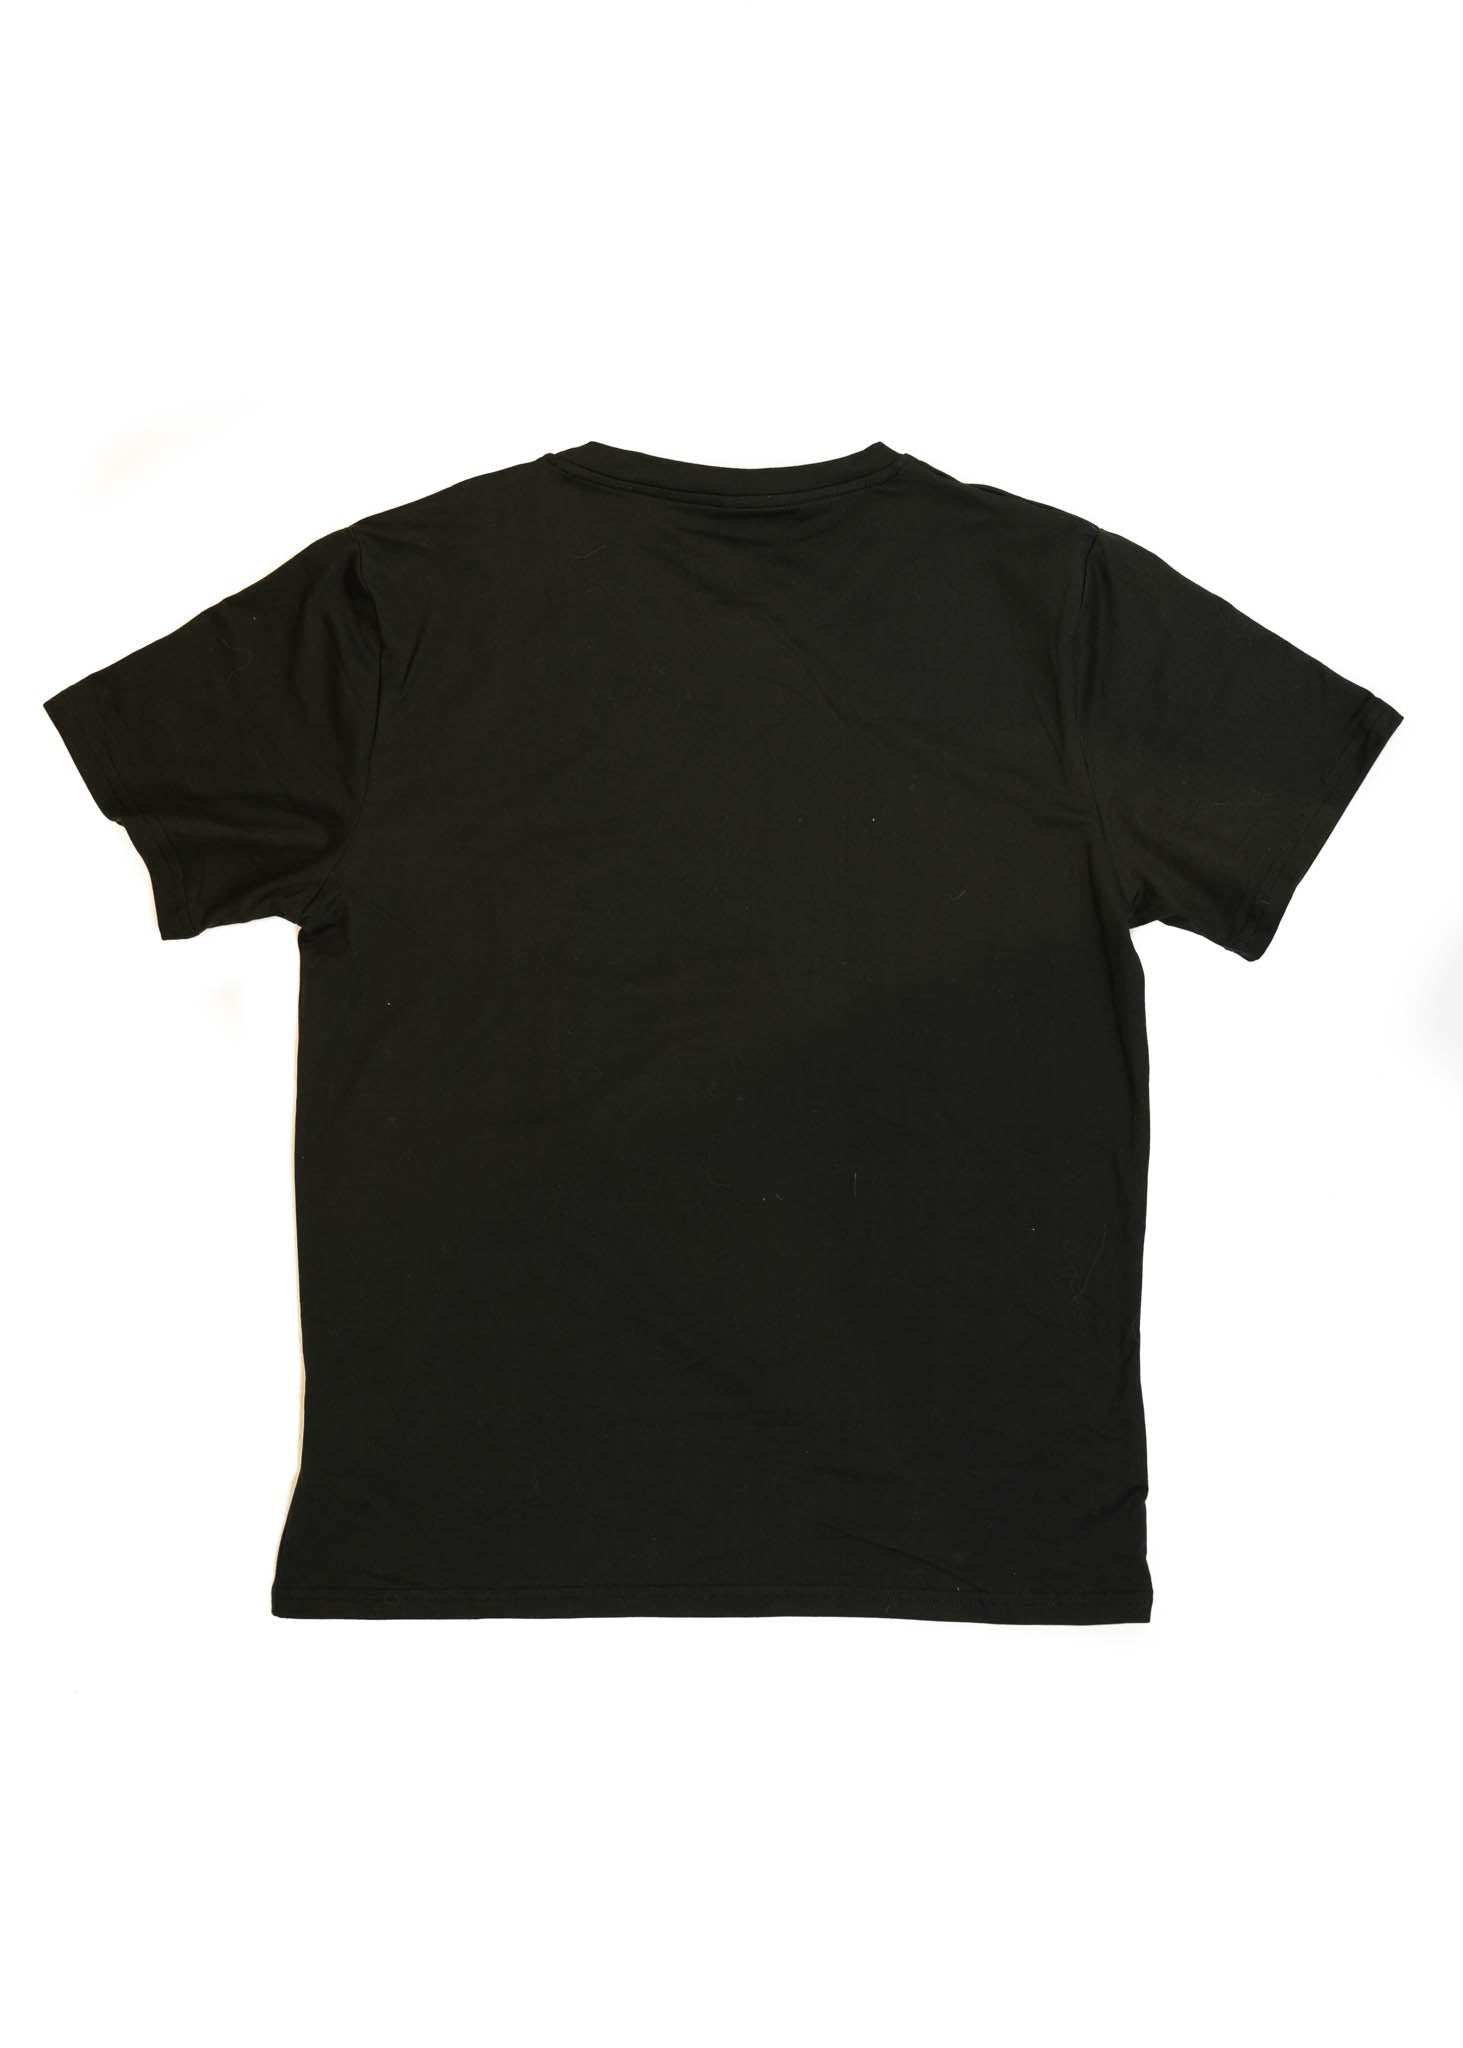 A black VW VolkswagenT-Shirt for men. Photo is the back of the shirt with an embroidered modified green Mk1 Golf. Fabric composition is 100% polyester. The material is very stretchy, soft, comfortable, breathable, and non-transparent. The style of this shirt is short sleeve, with a crewneck neckline.